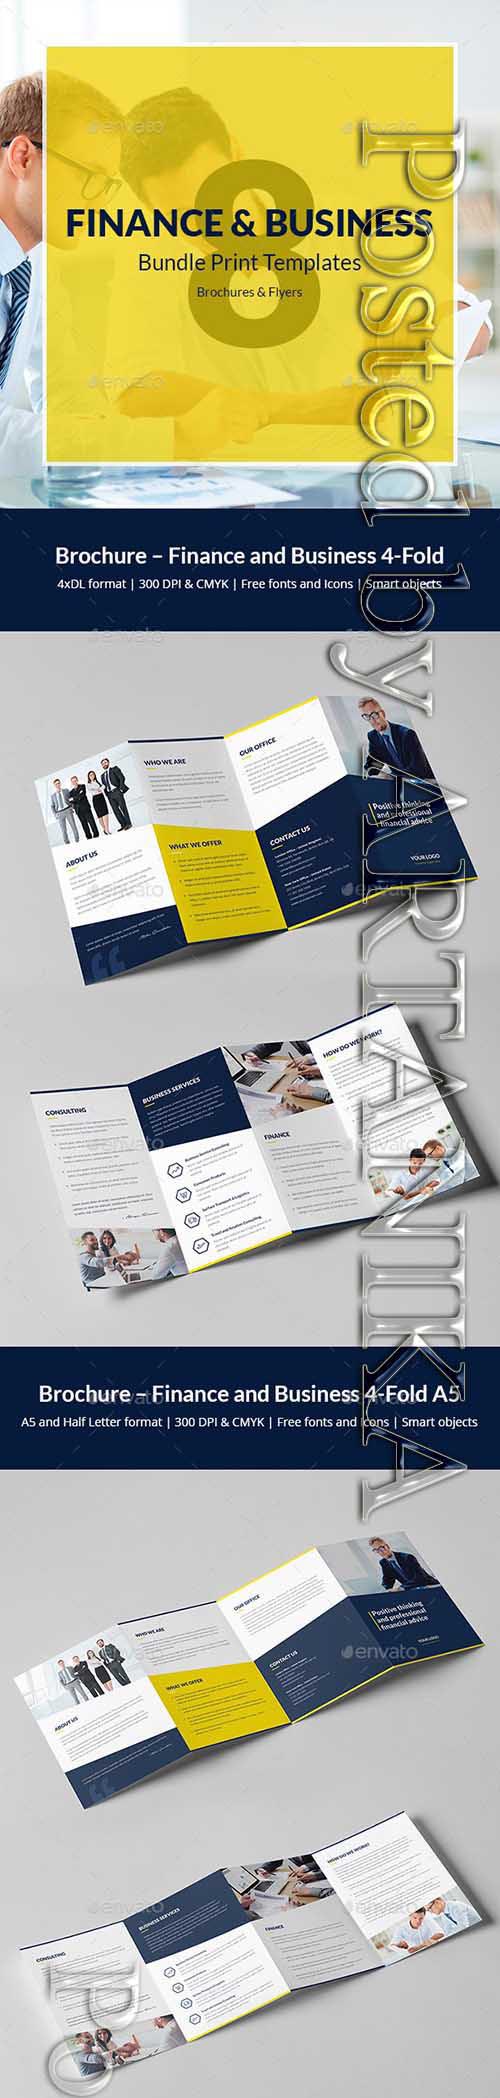 Finance and Business - Brochures Bundle Print Templates 8 in 1 21726735